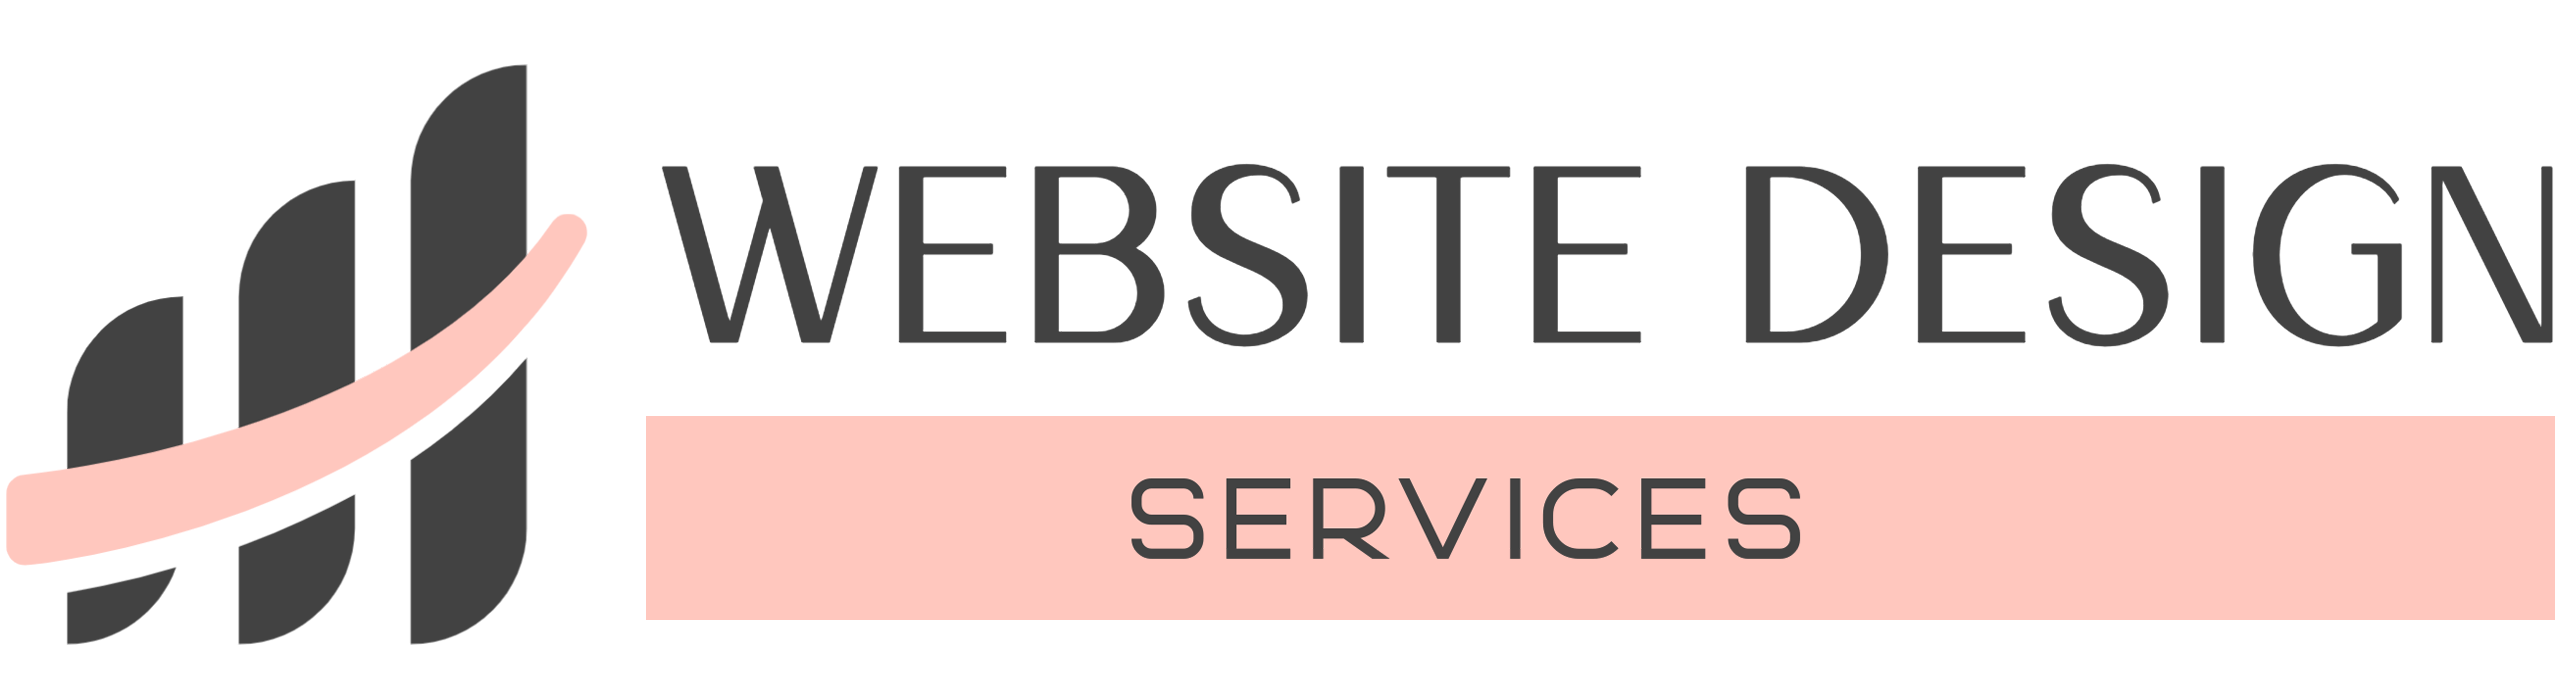 the best website design in taree NSW and all Australia